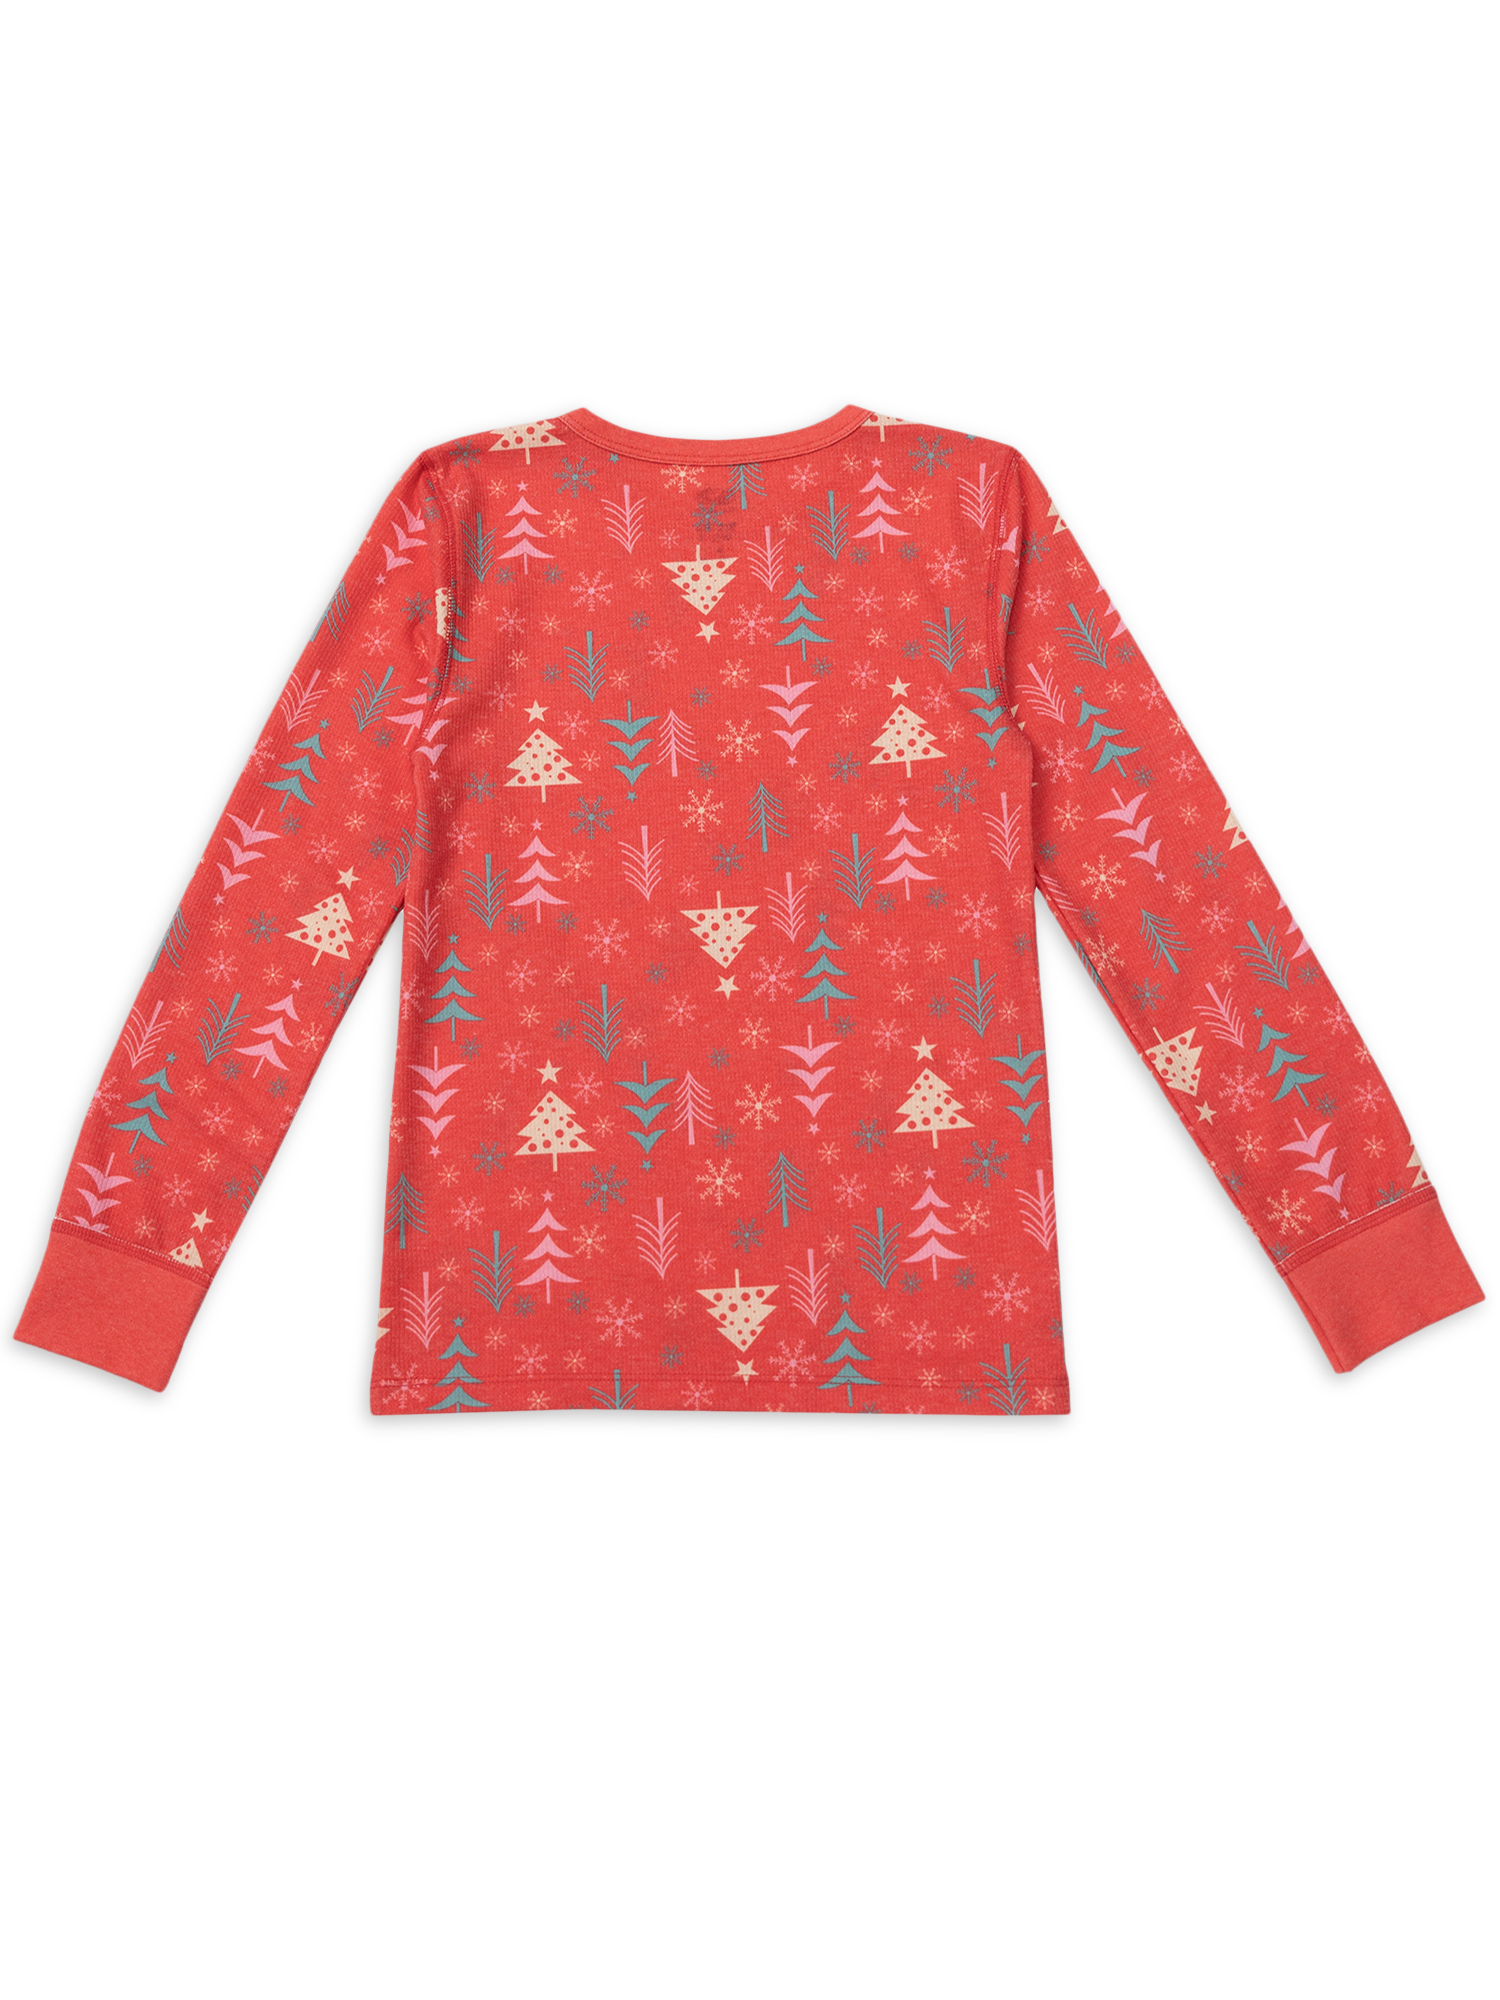 Fruit of the Loom Boy's & Girl's Holiday Thermal Top and Bottom Set, Sizes 4-18 - image 4 of 9